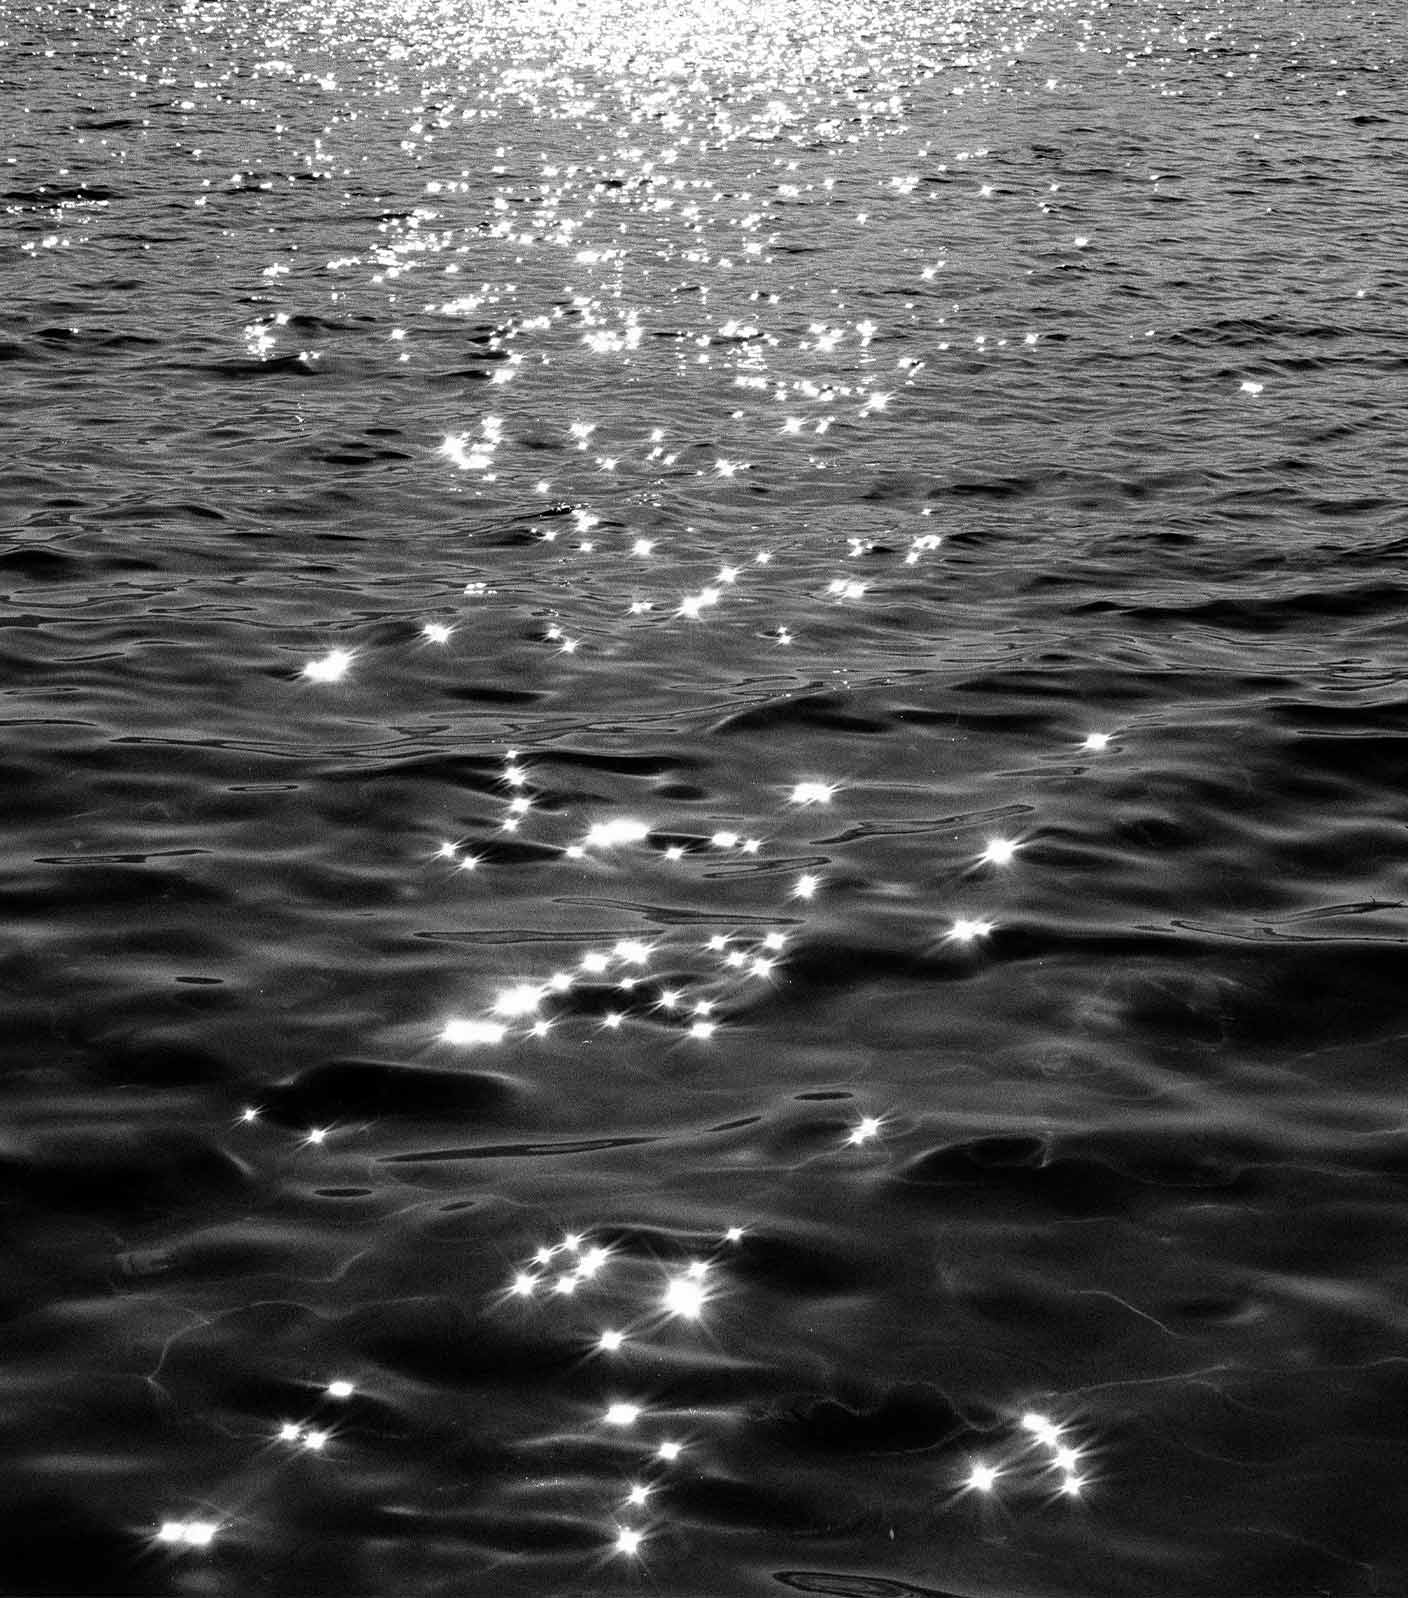 A high contrast black-and-white photo of the ocean gently moving with sunshine reflecting from the water surface in beautiful sparkles.